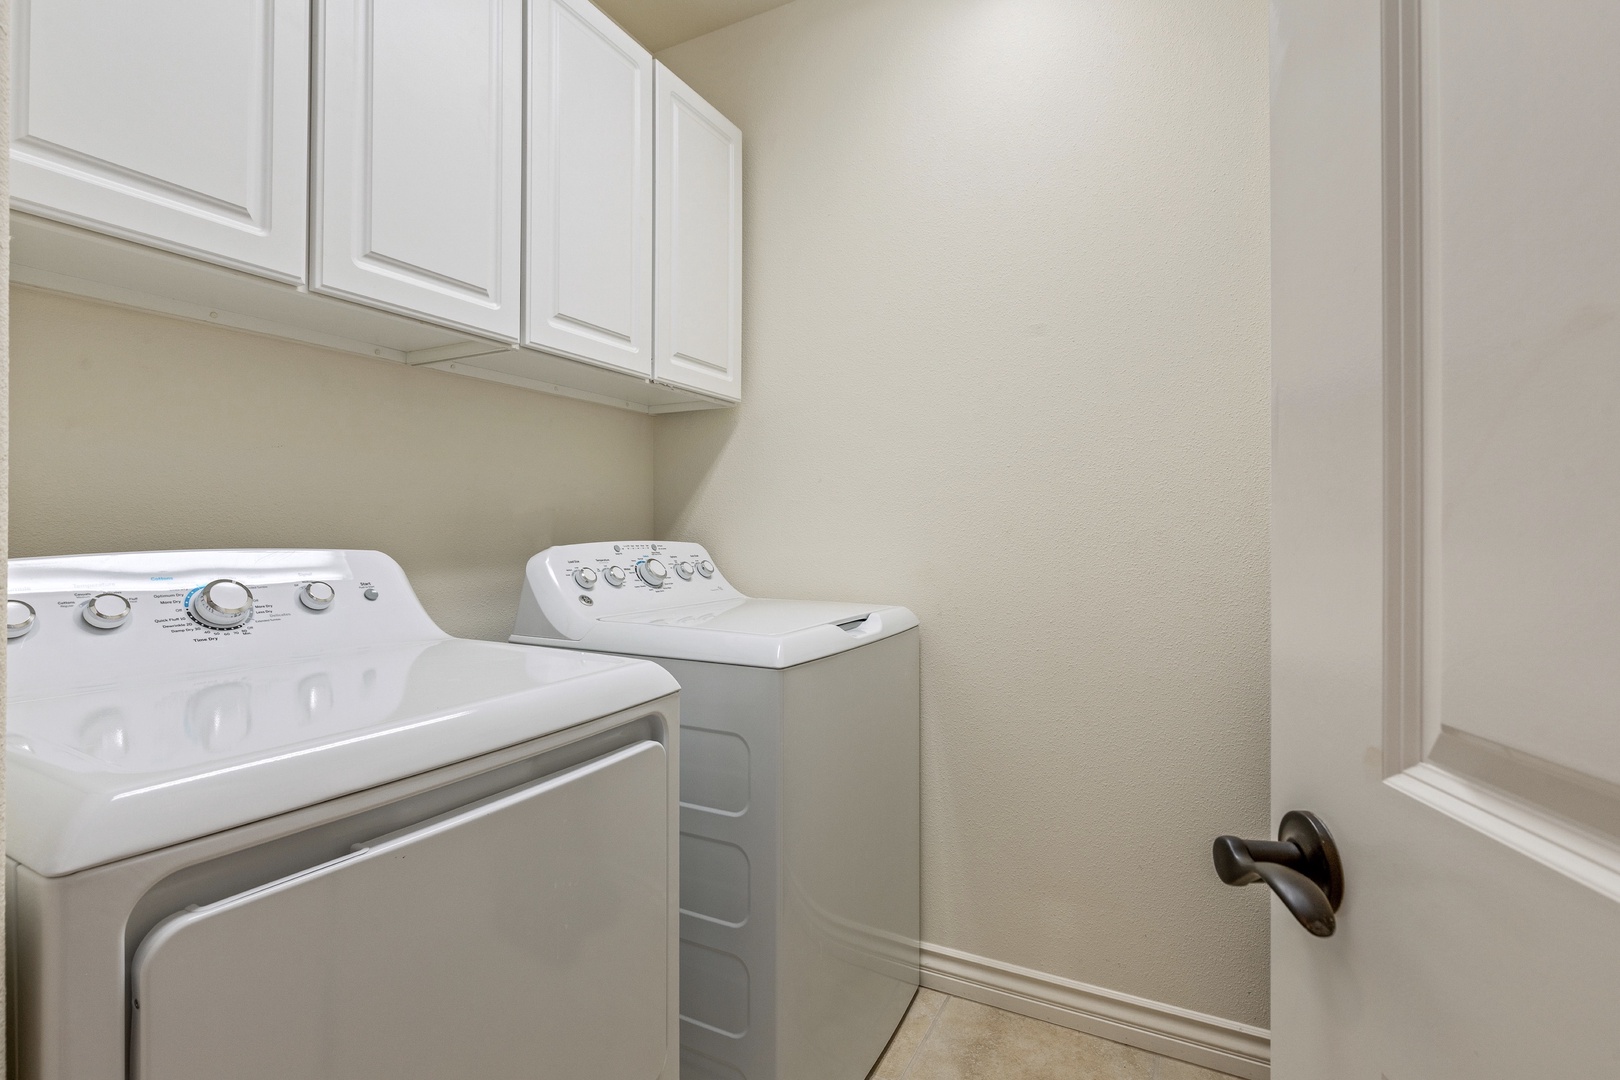 Kamuela Vacation Rentals, 2BD Kumulani (I-4) at Mauna Kea Resort - Dedicated laundry room with oversized washer and dryer and supplied laundry
products.